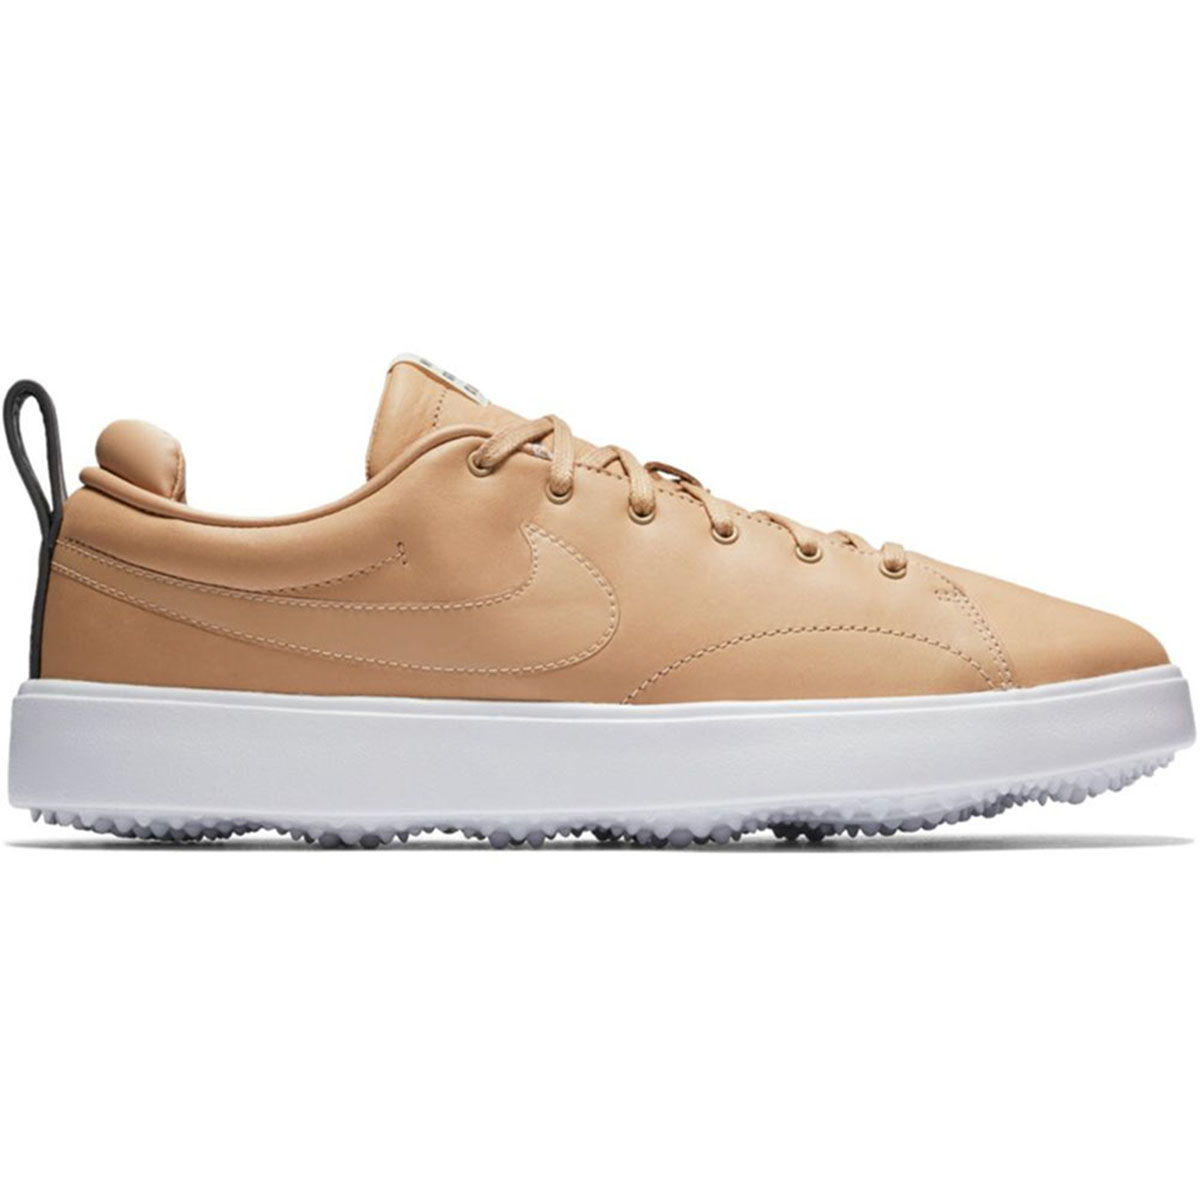 nike course classic golf shoes